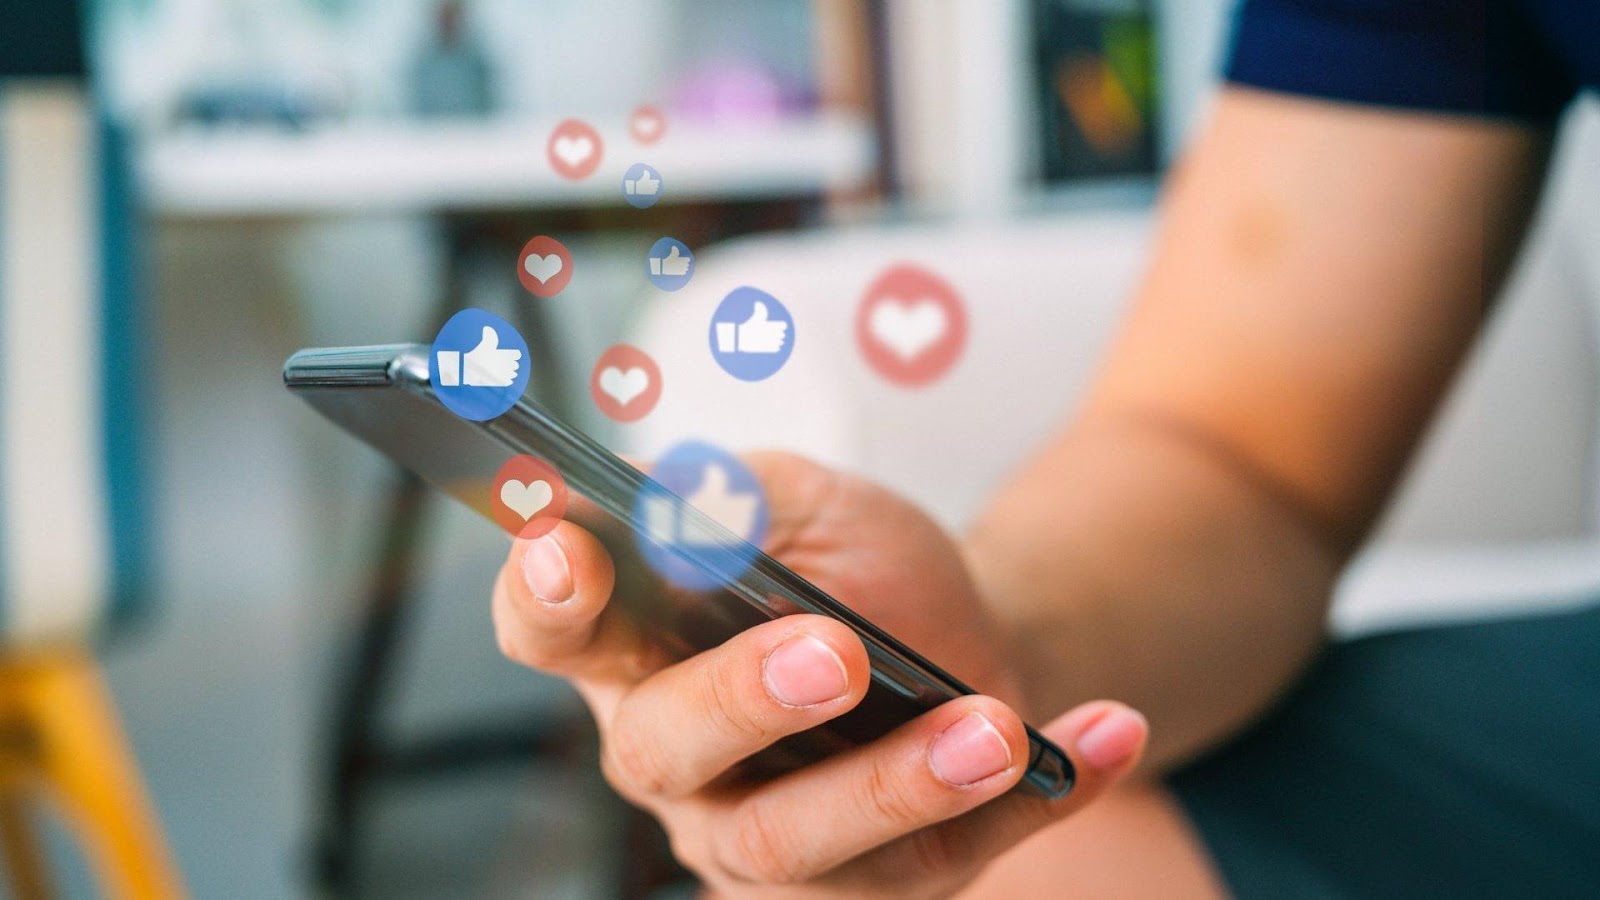 5 Ways to Use Social Media to Create Better Engagements | Inc.com